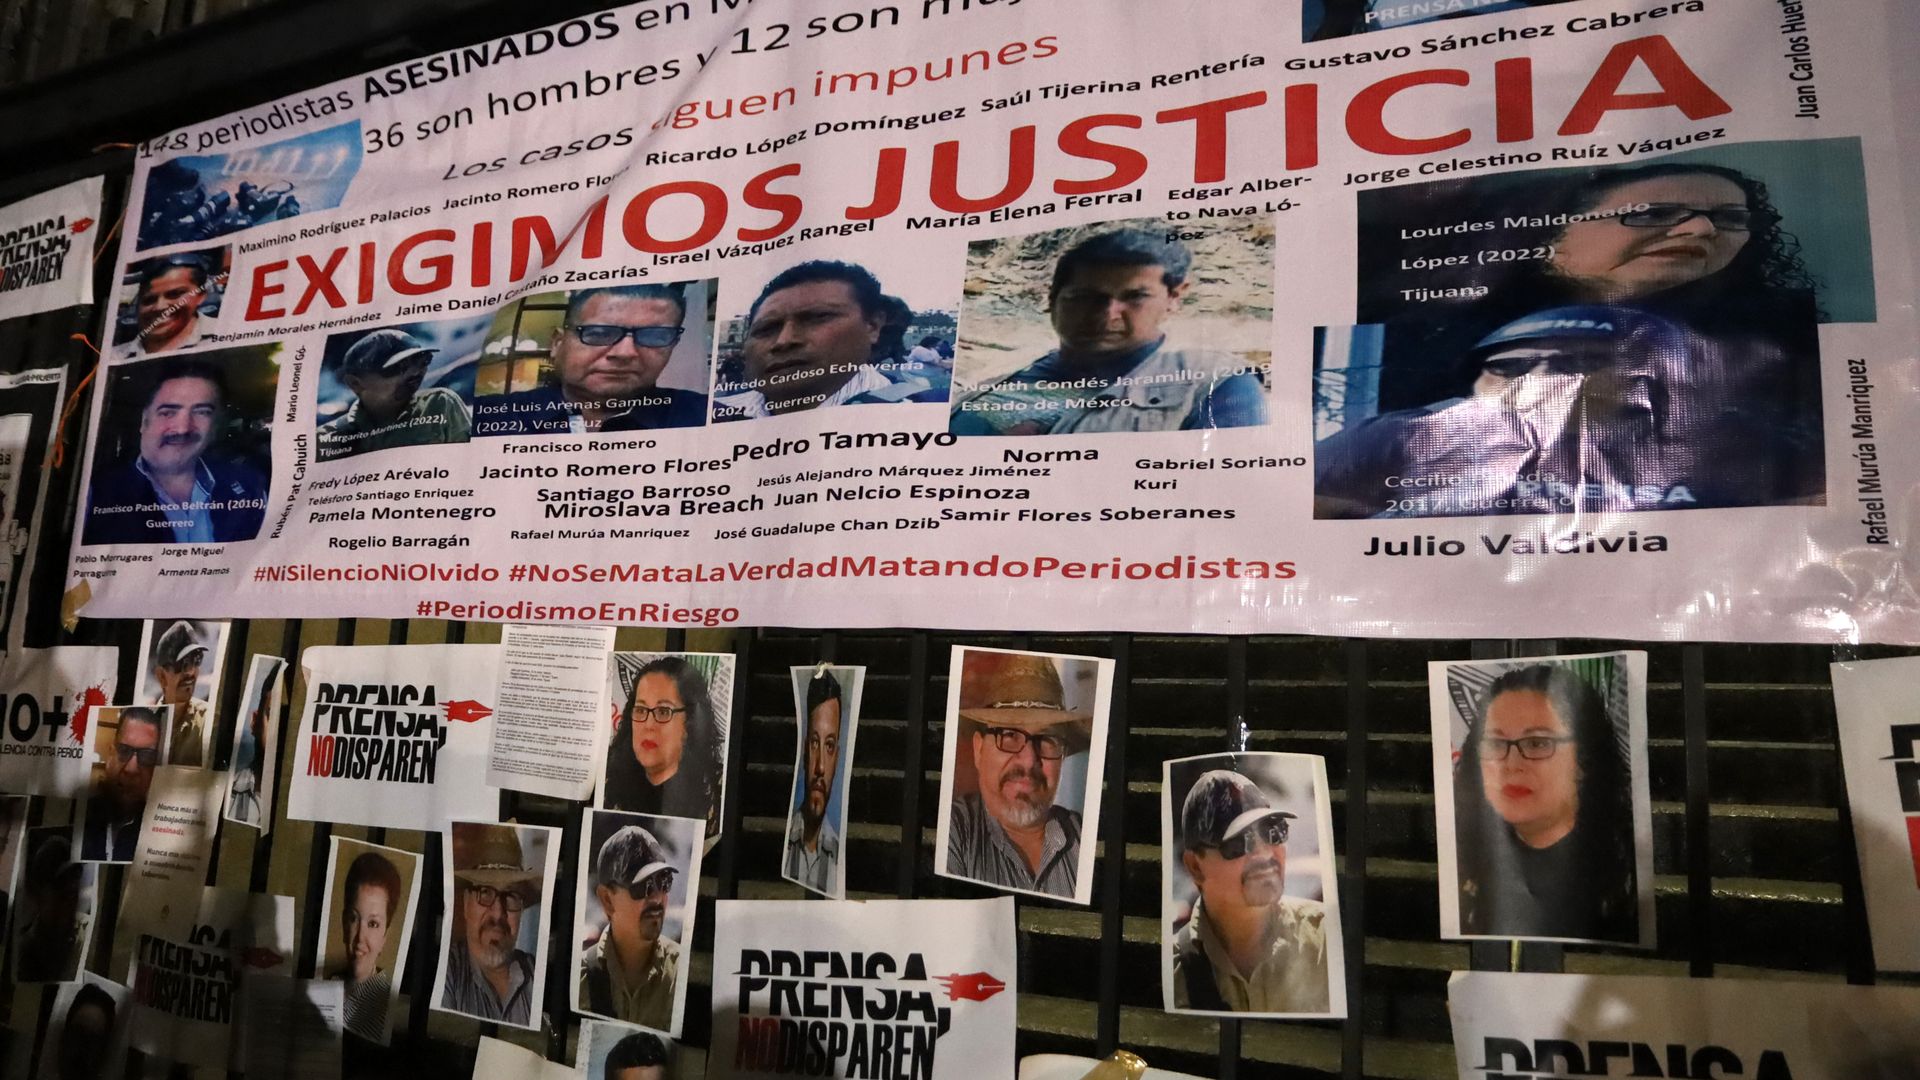 A wall showing pictures of slain Mexican journalists with a sign that says "we demand justice"